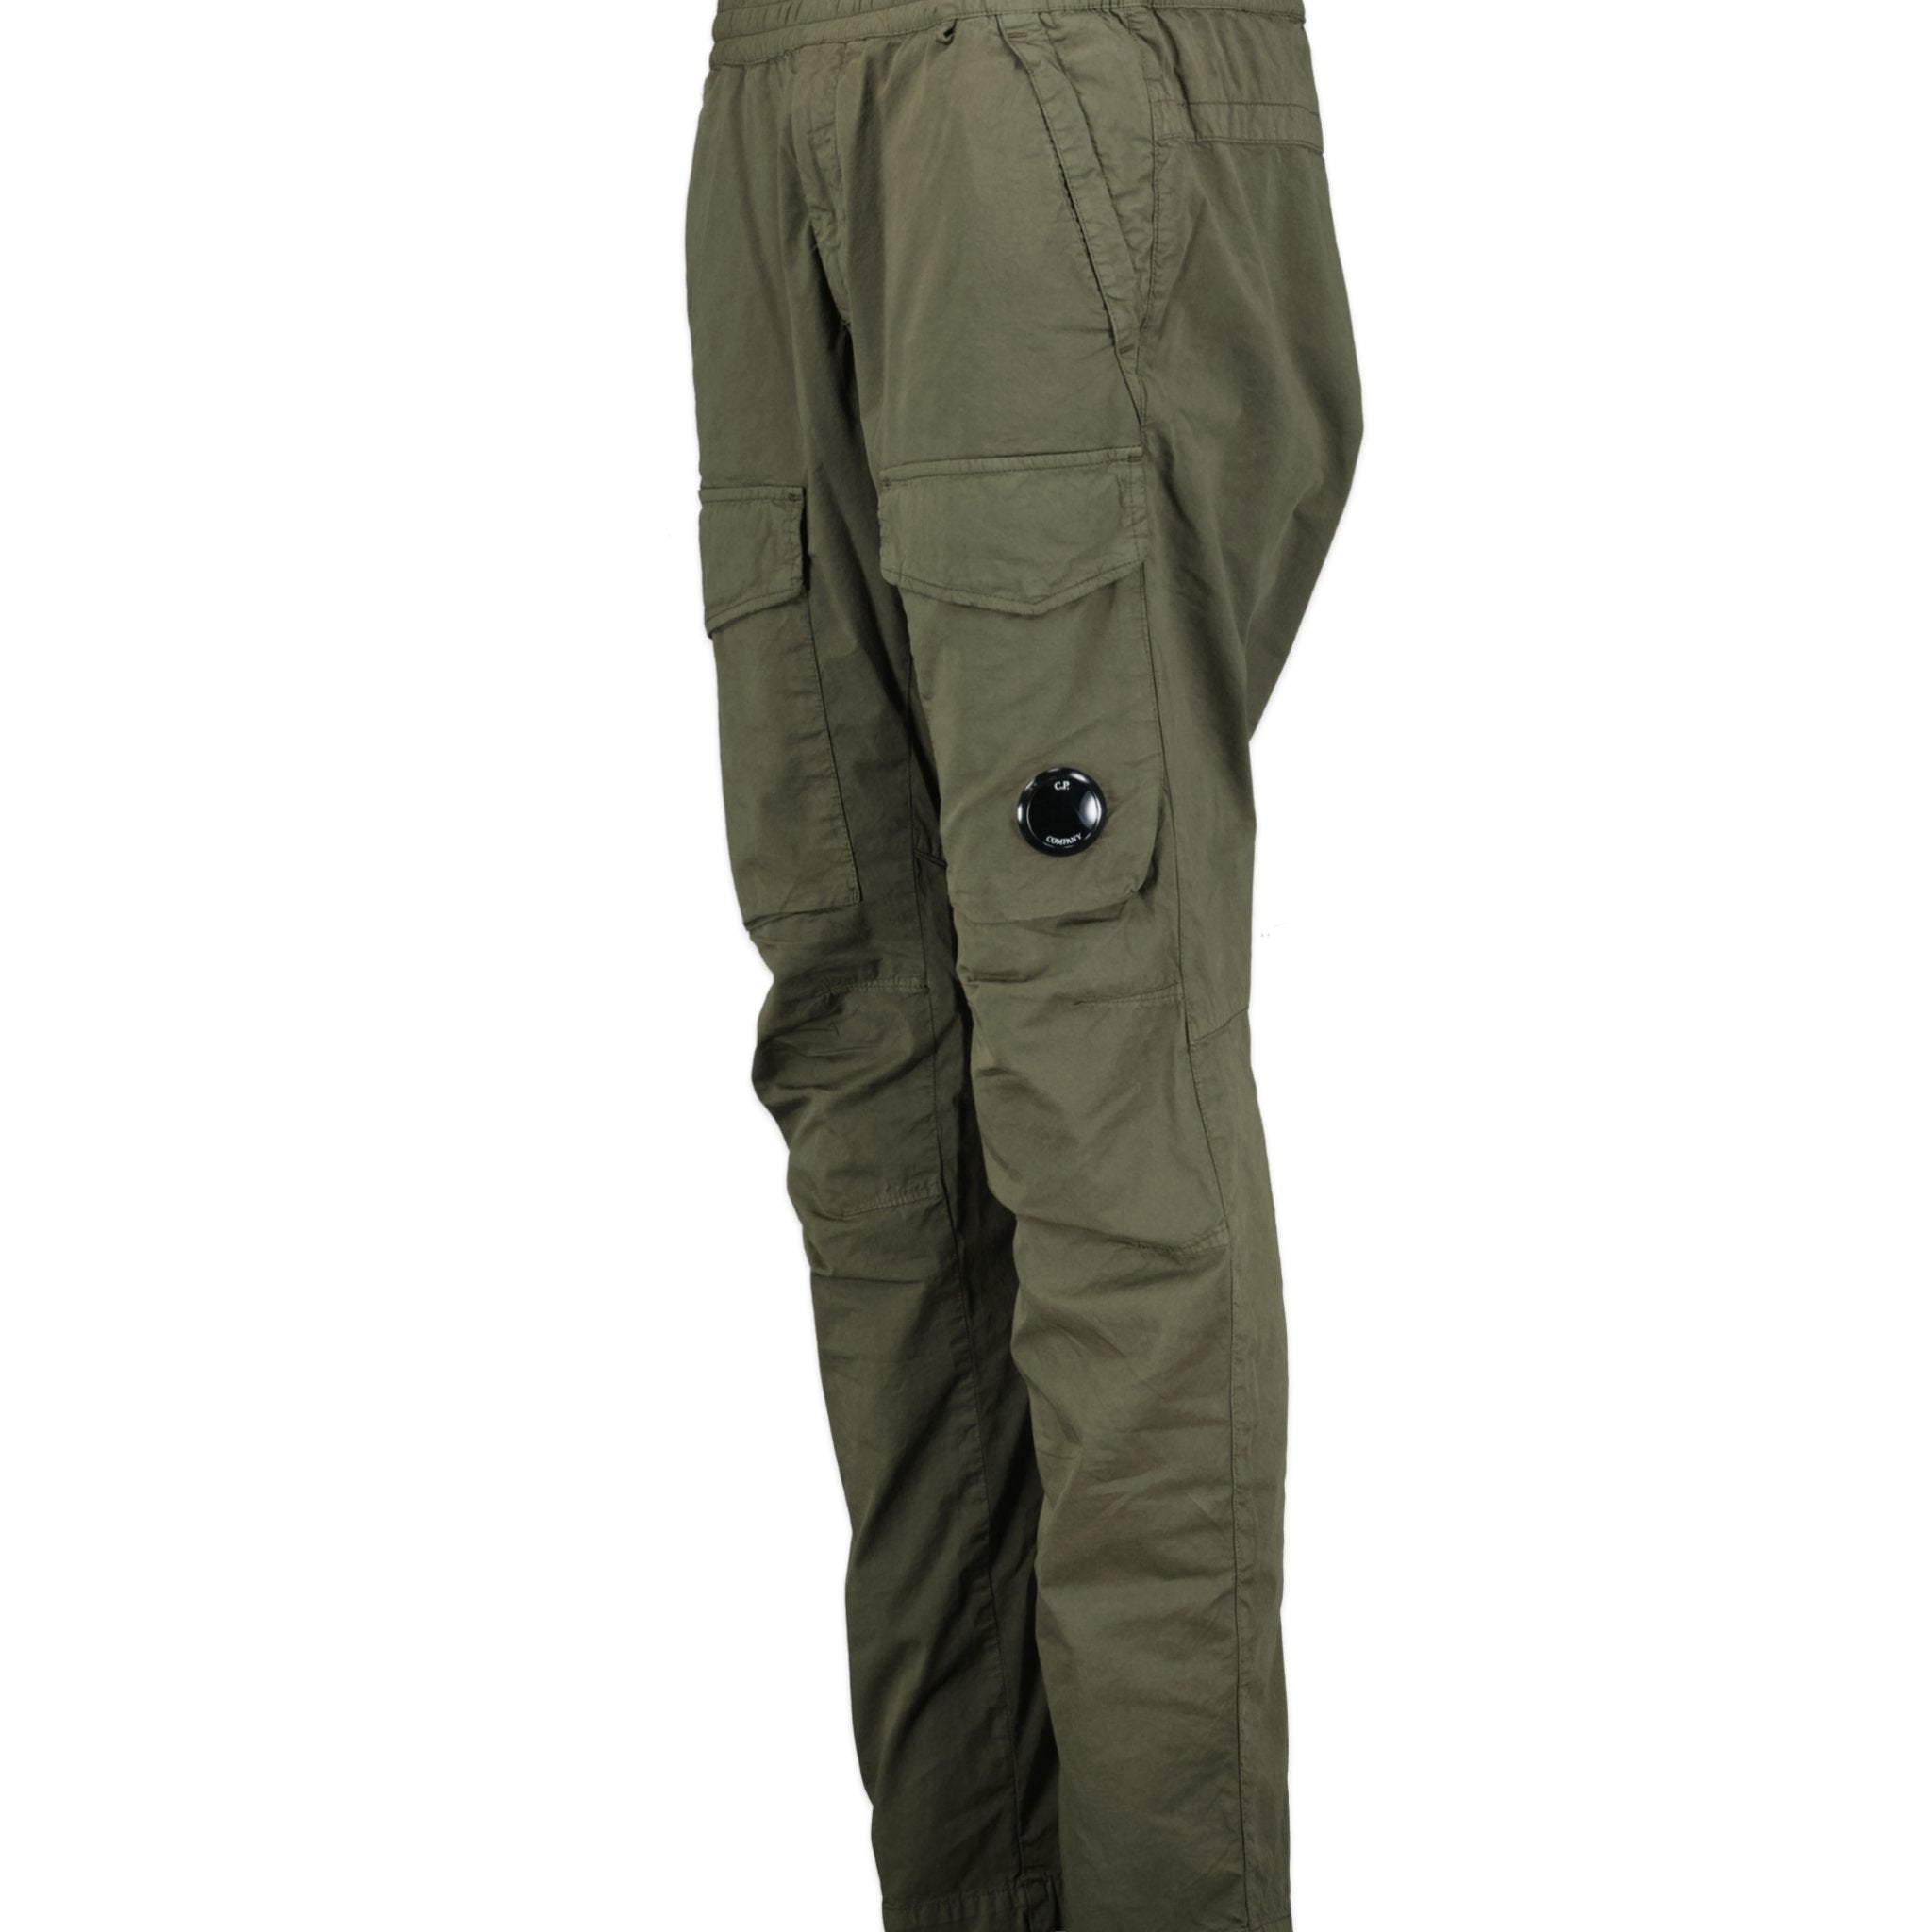 C.P. Company 331A Twill Cargo Pants - Olive - Due West